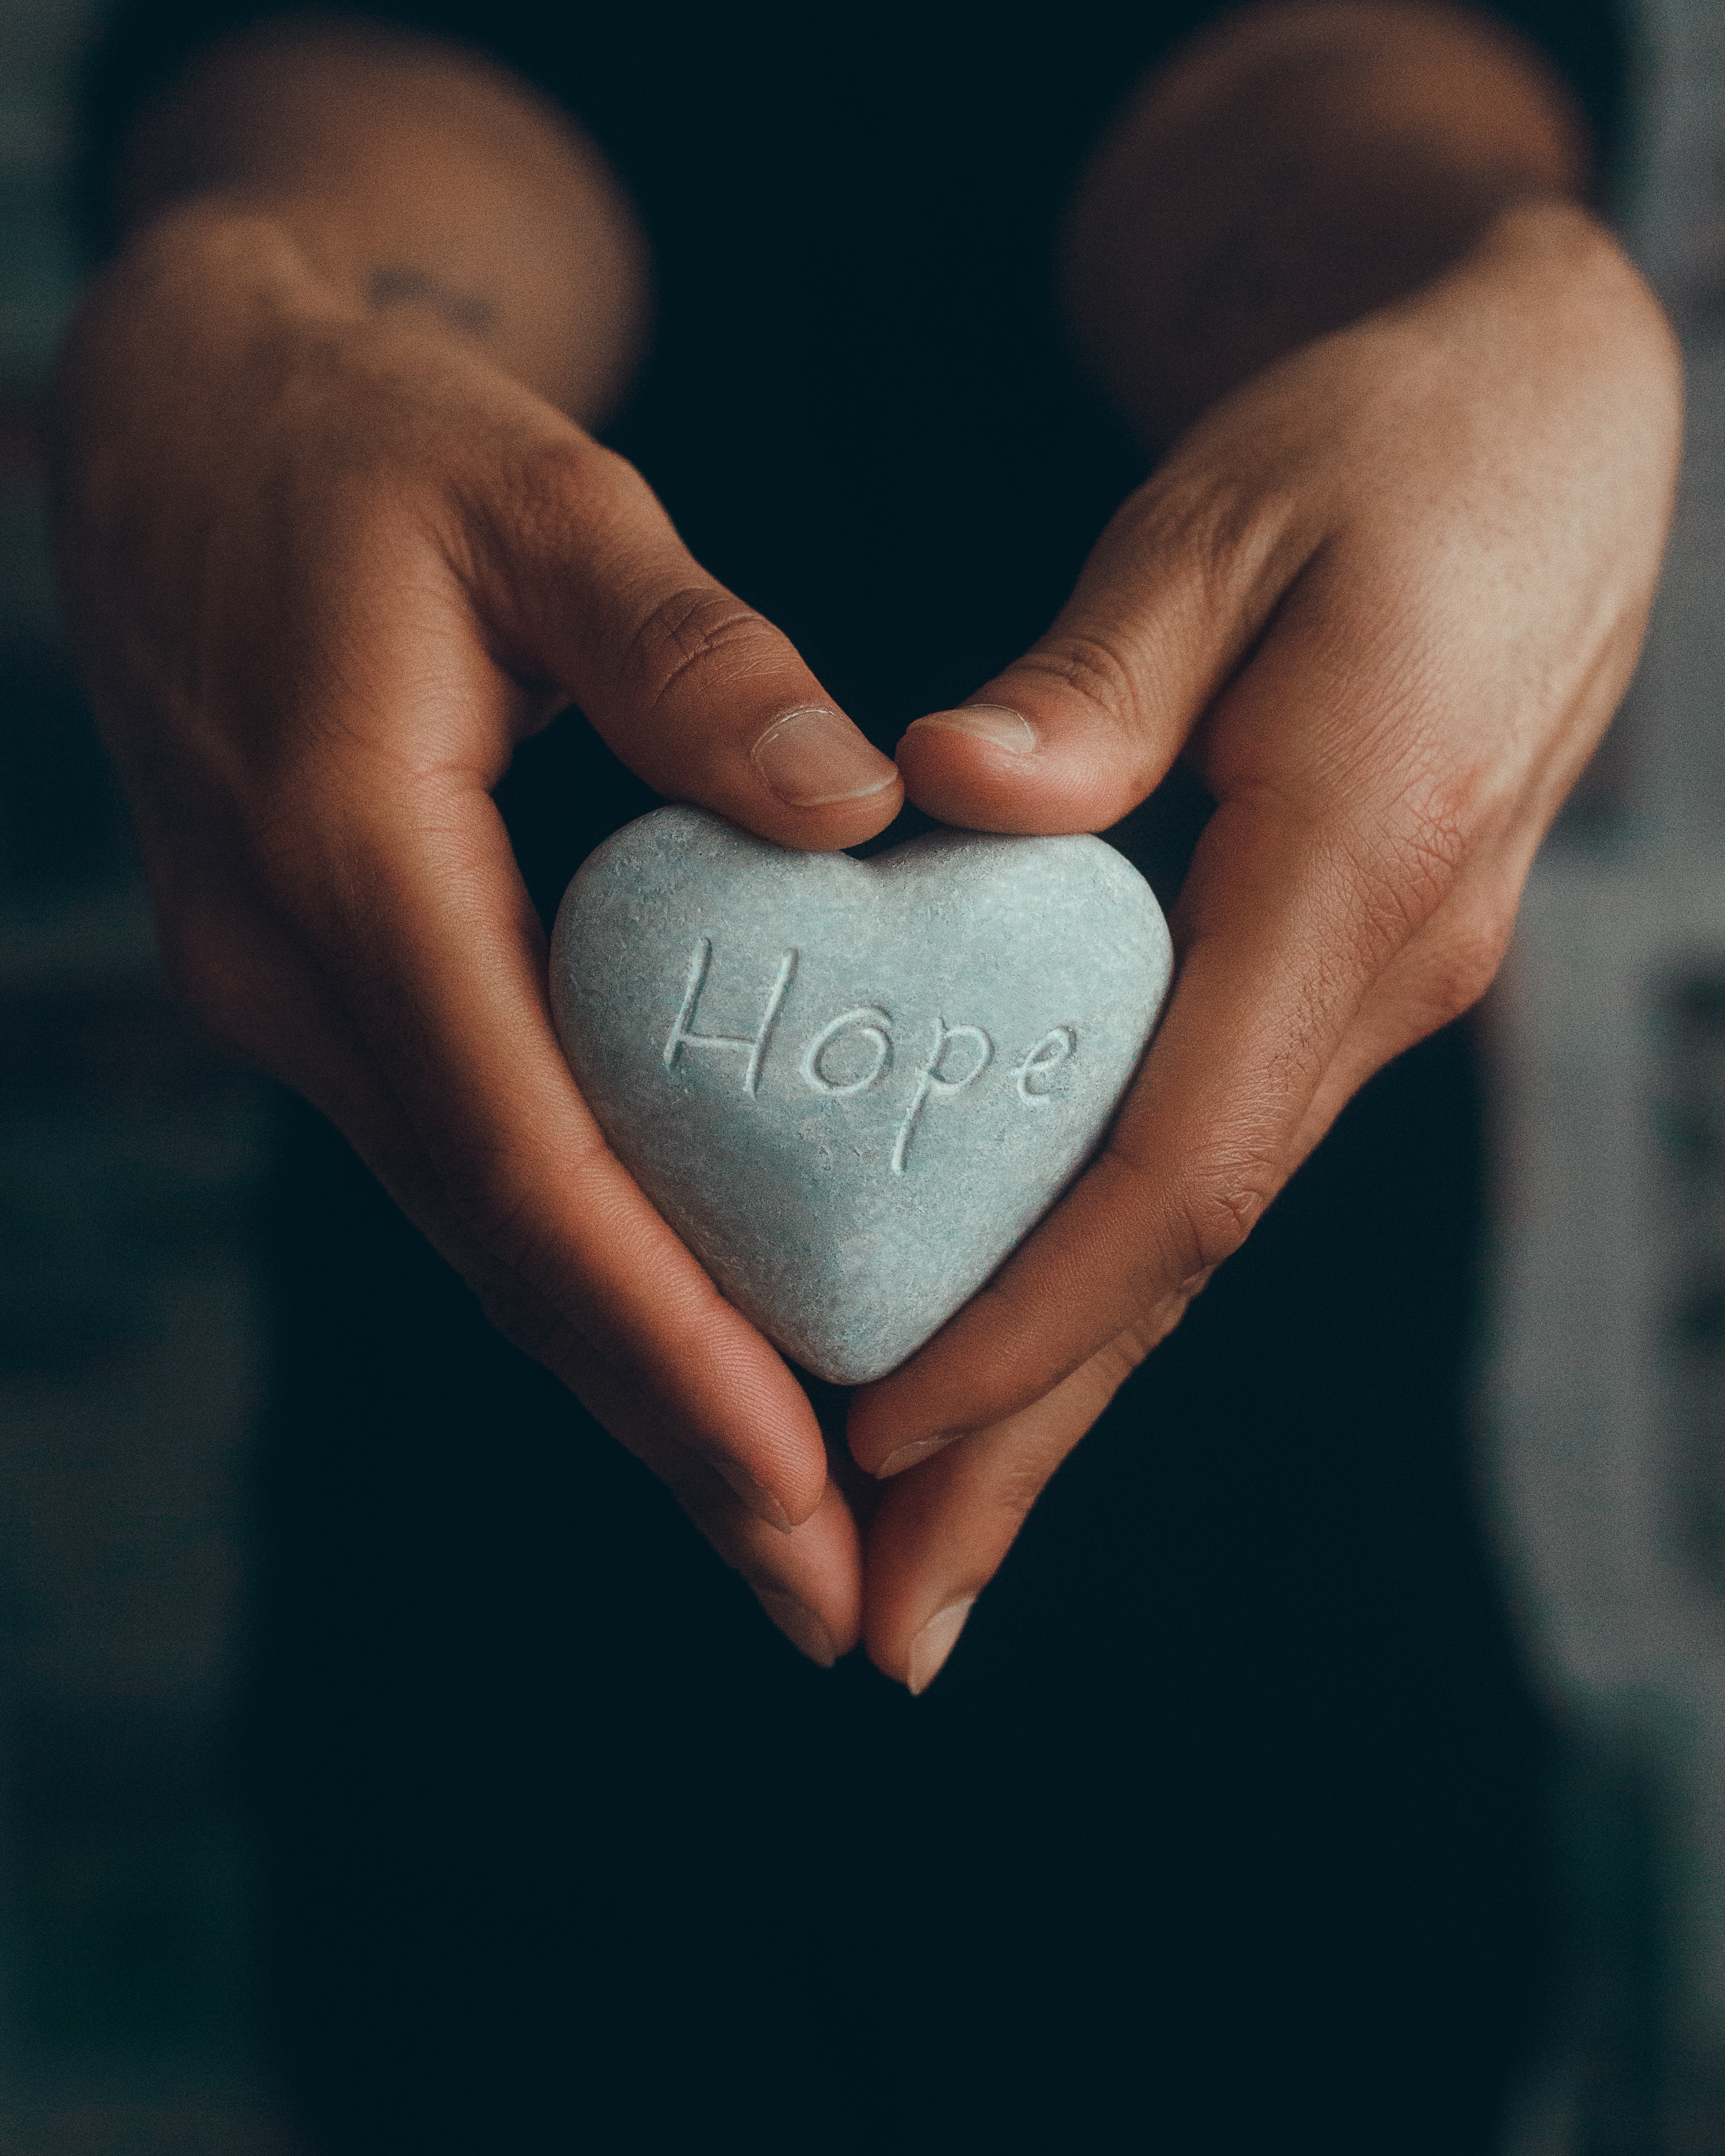 hope, inscription, words, heart, rock, hands, stone, word cell phone wallpapers